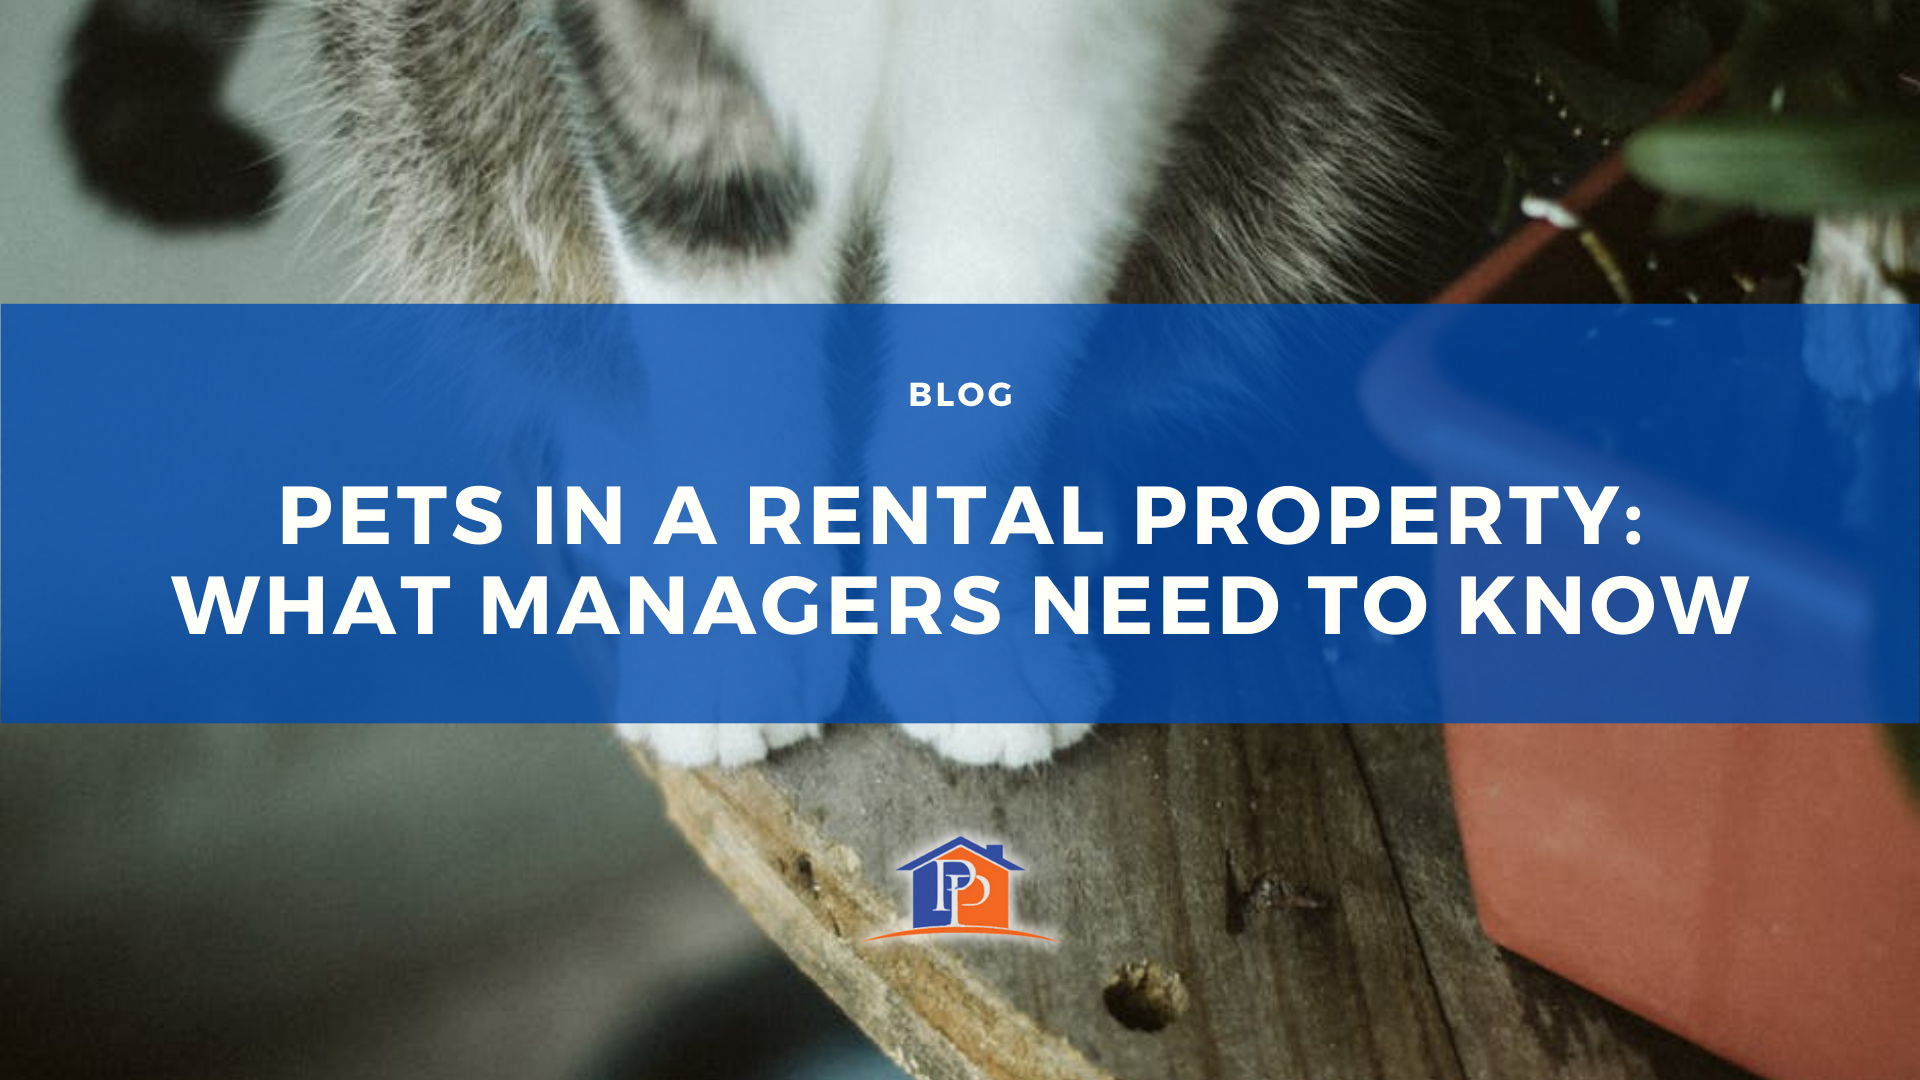 Pets in a Rental Property: What Managers Need to Know